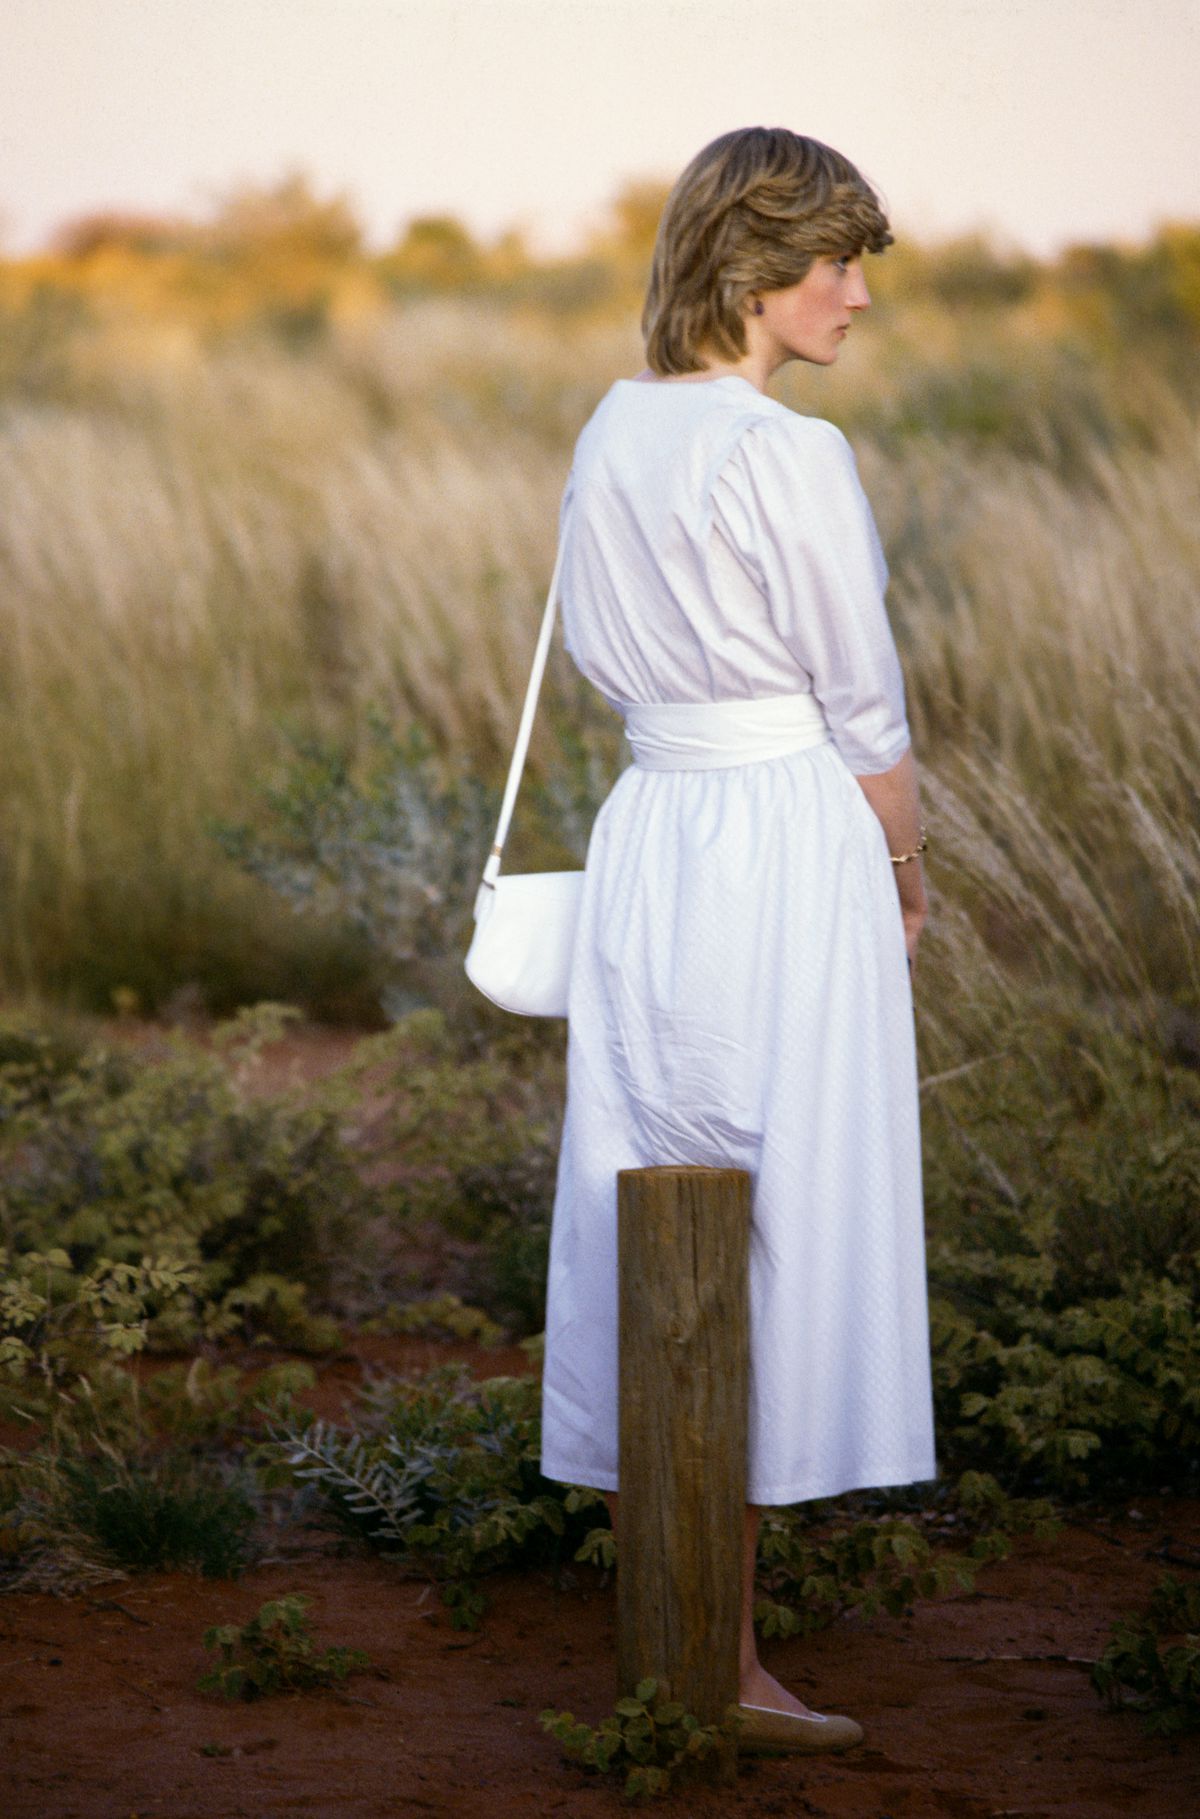 Diana Princess of Wales in front of Uluru/Ayers Rock near Alice Springs, Australia during the Royal Tour of Australia, 21st March 1983.(Photo by Anwar Hussein)